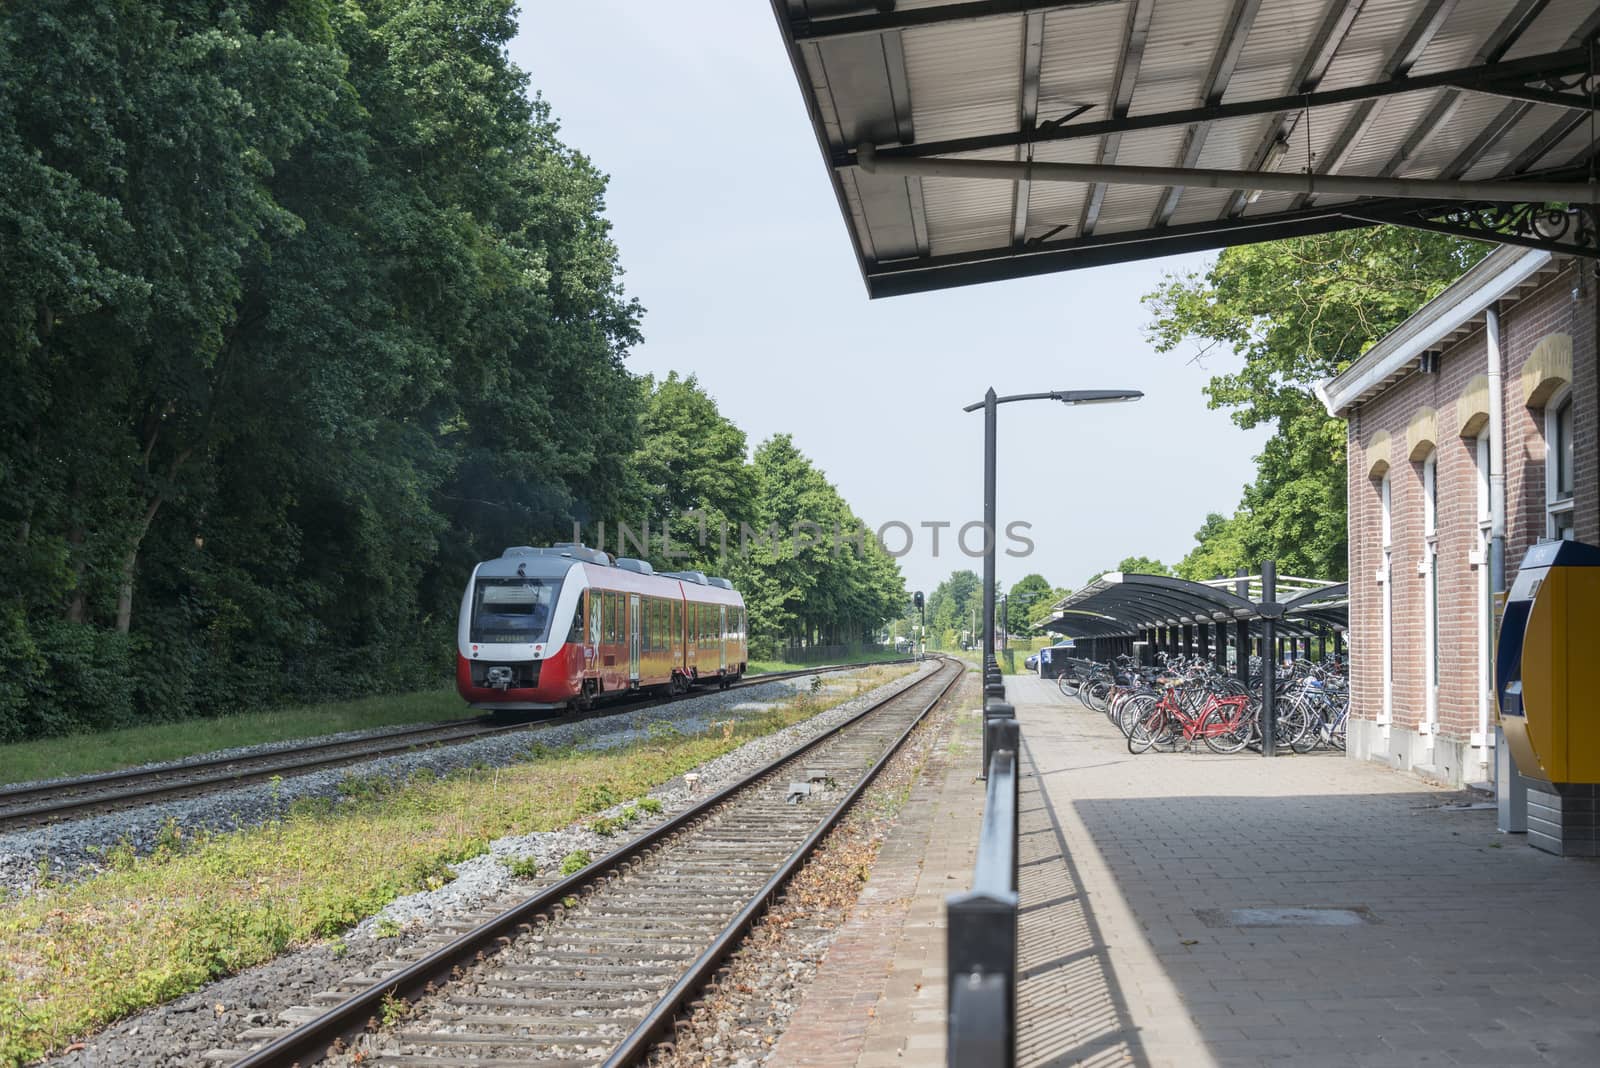 DELDEN,HOLLAND-JULY 4,2015: red train in holland crossing station of the city delden,Delden is the smallest station in the east part of delden still in use